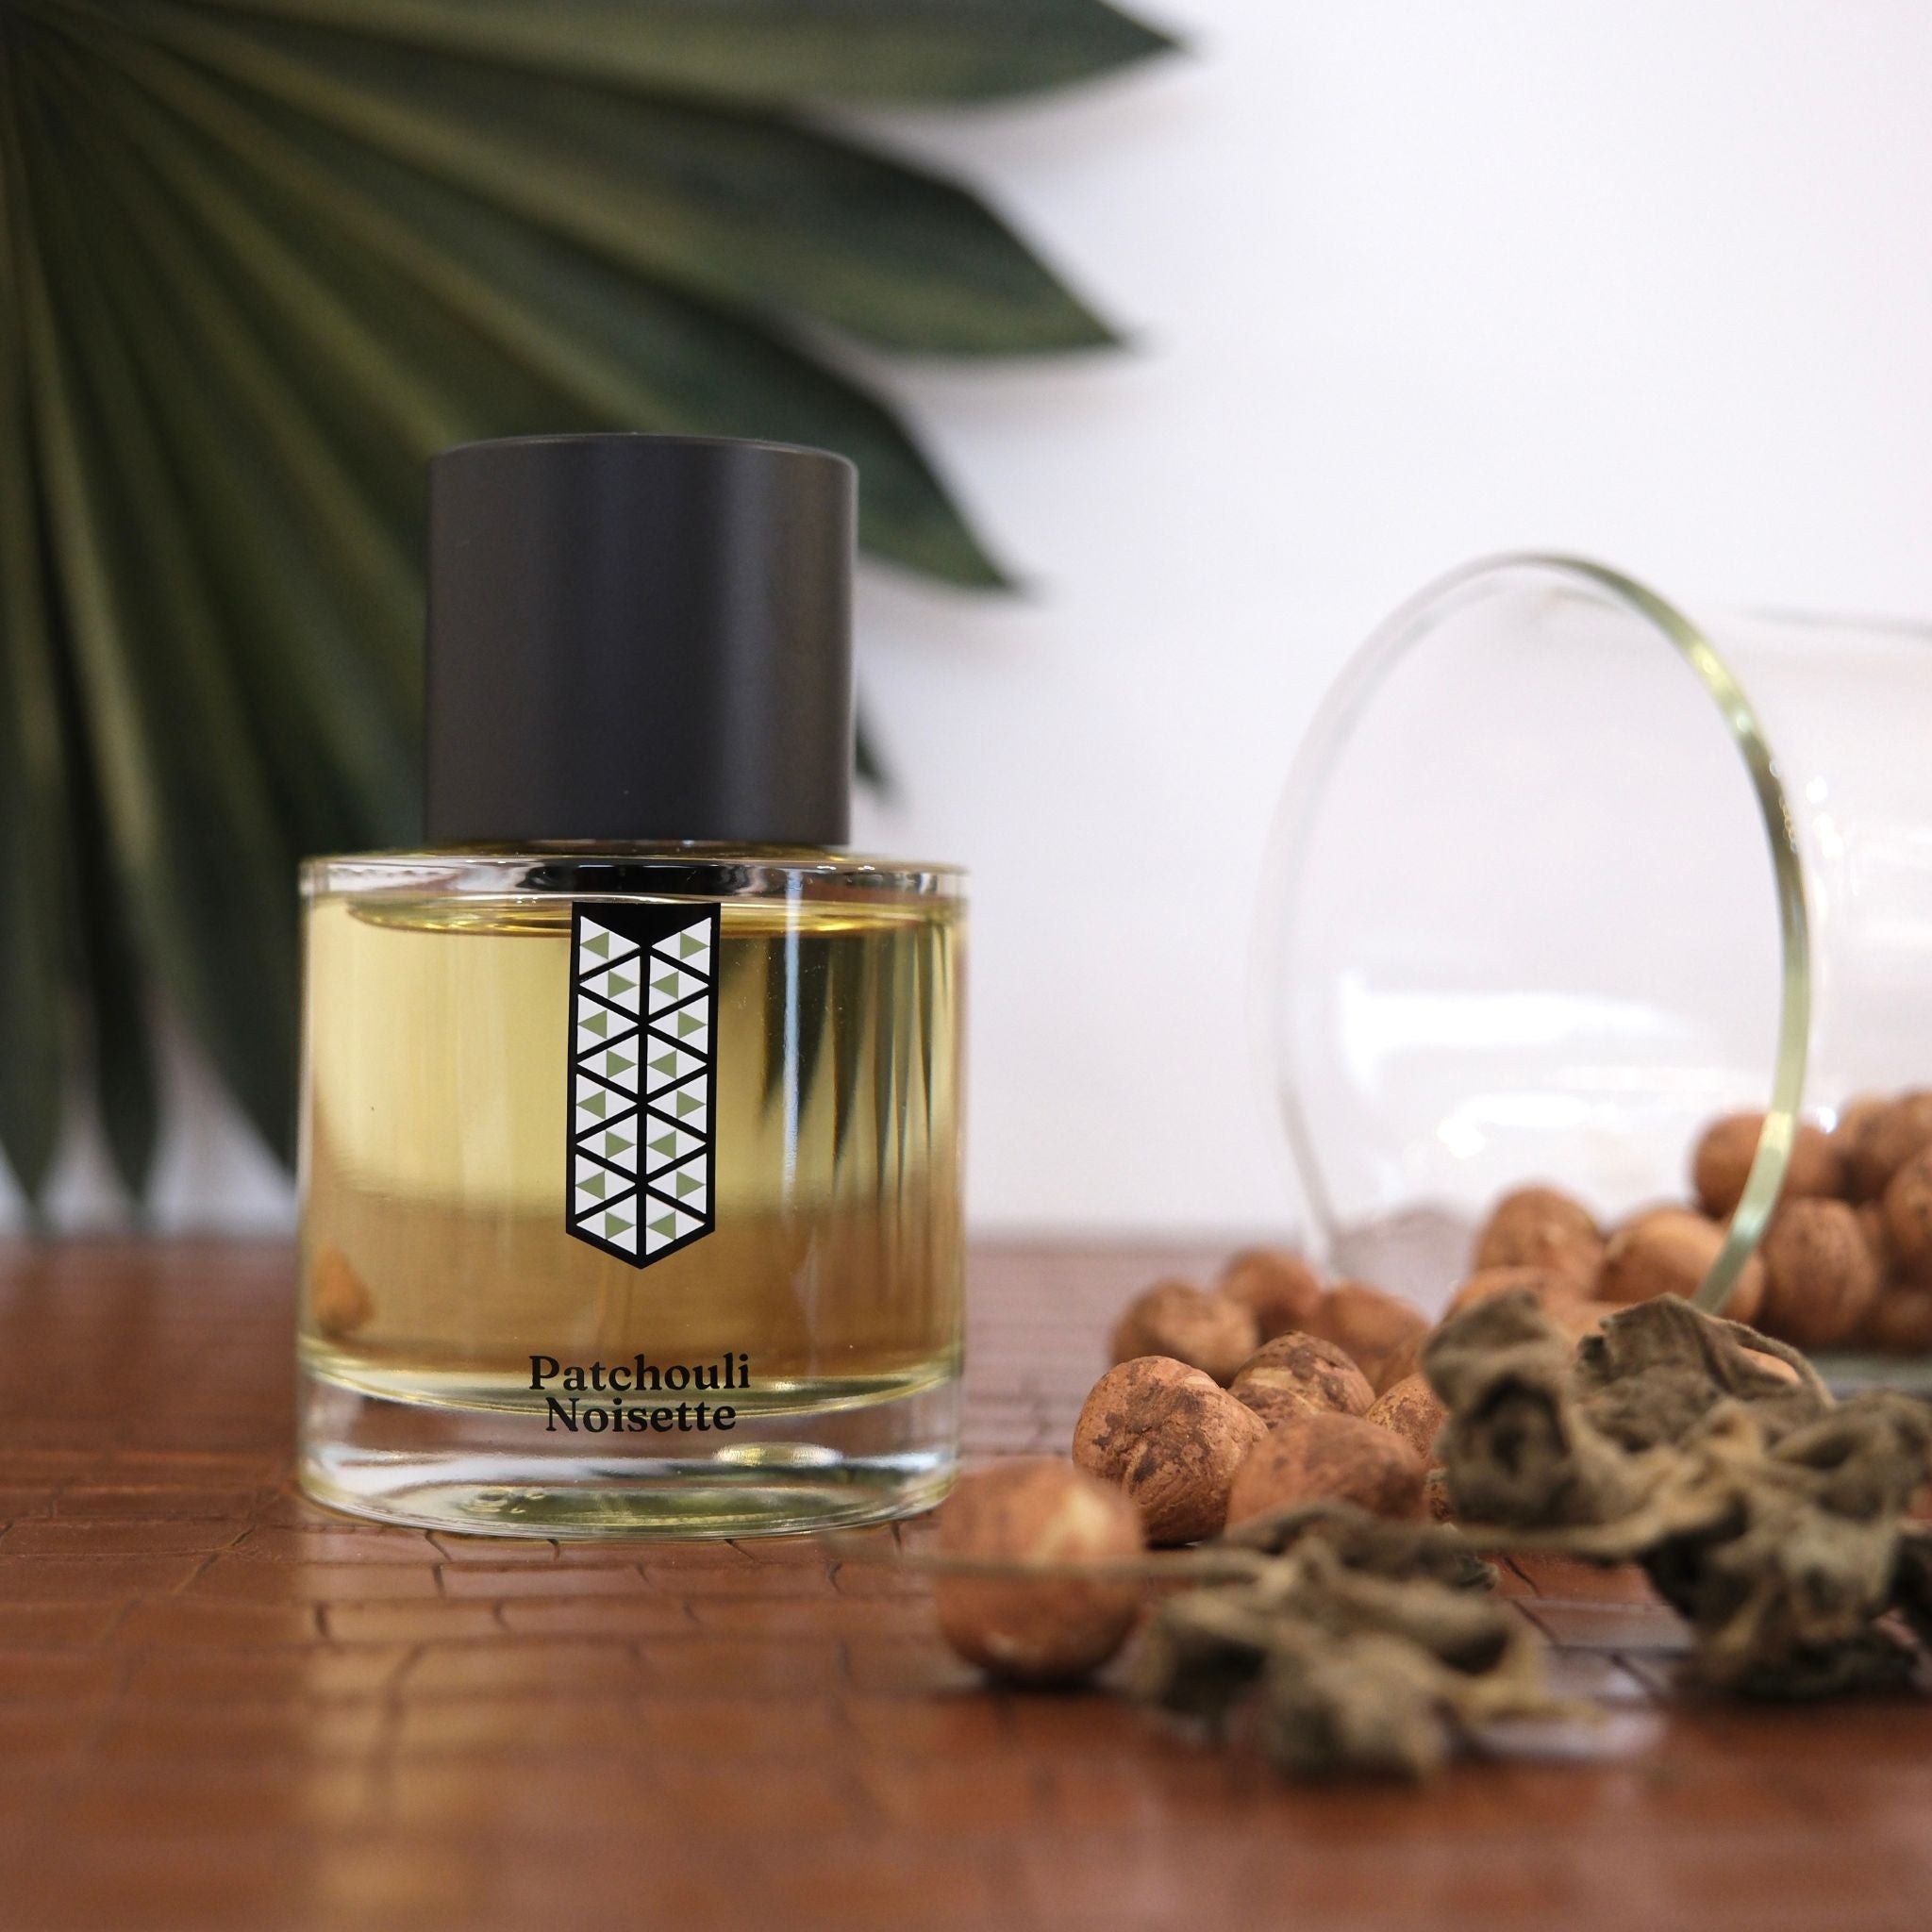 The 'Hazelnut Patchouli' perfume bottle from Les Indemodables, capturing the essence of luxury and innovation.